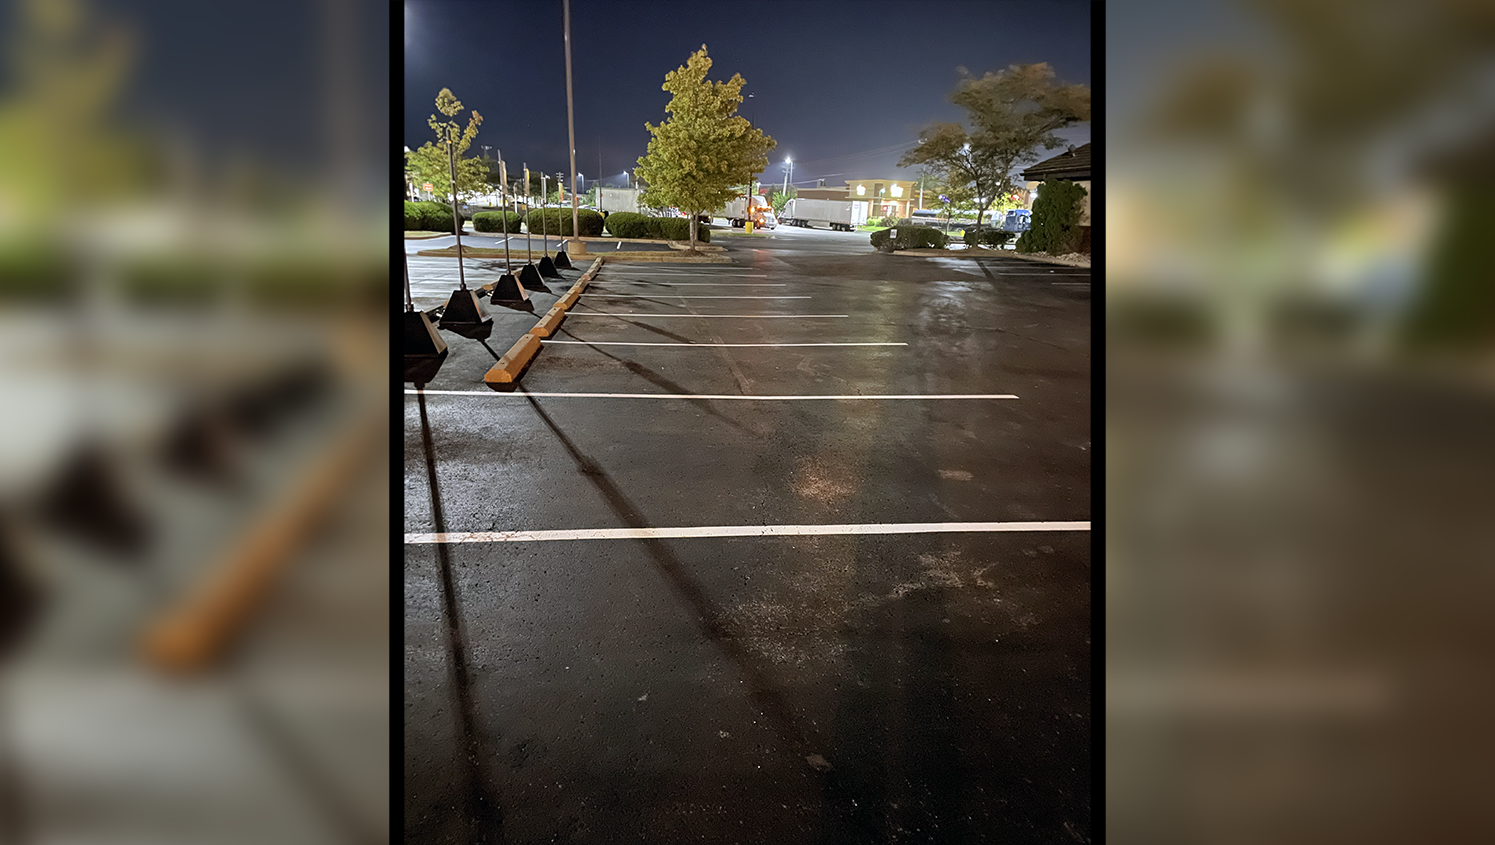 newly marked parking lot spaces for cheddars scratch kitchen